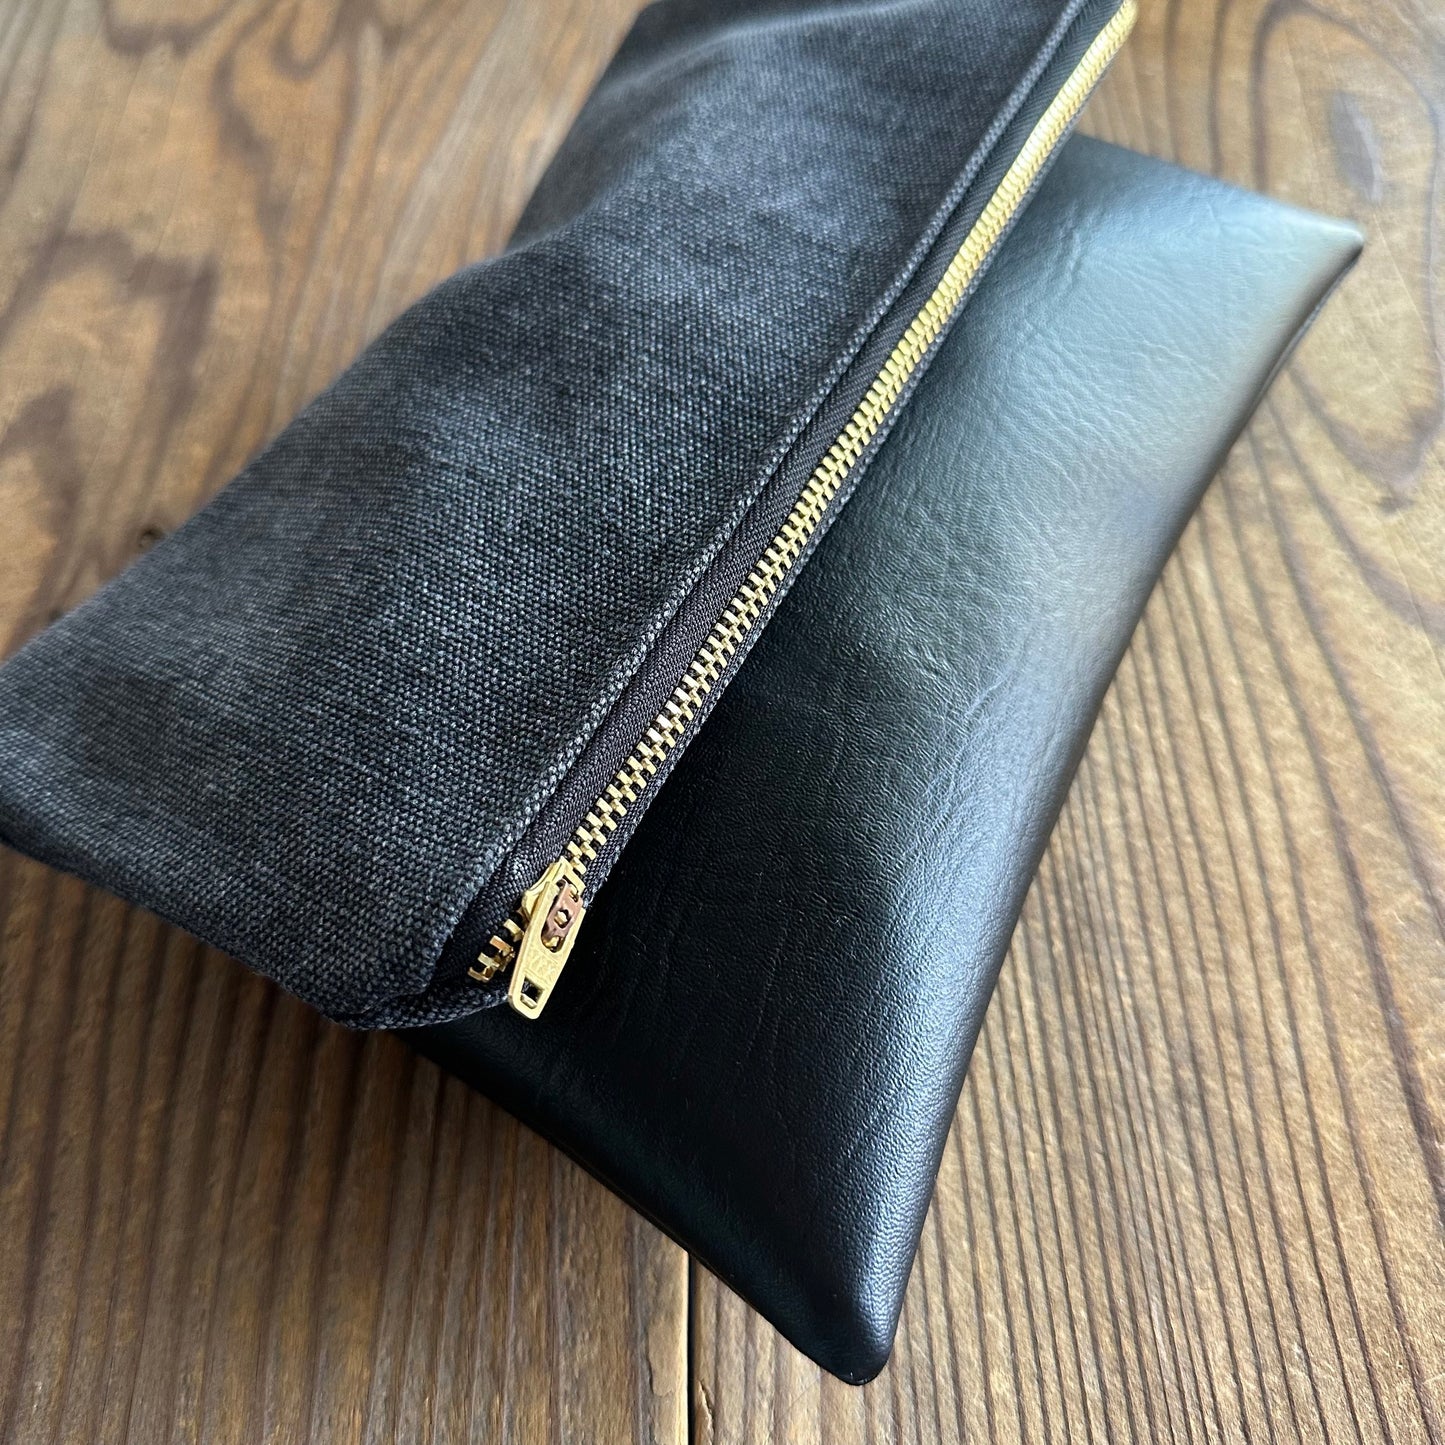 Charcoal Stonewashed Foldover Clutch